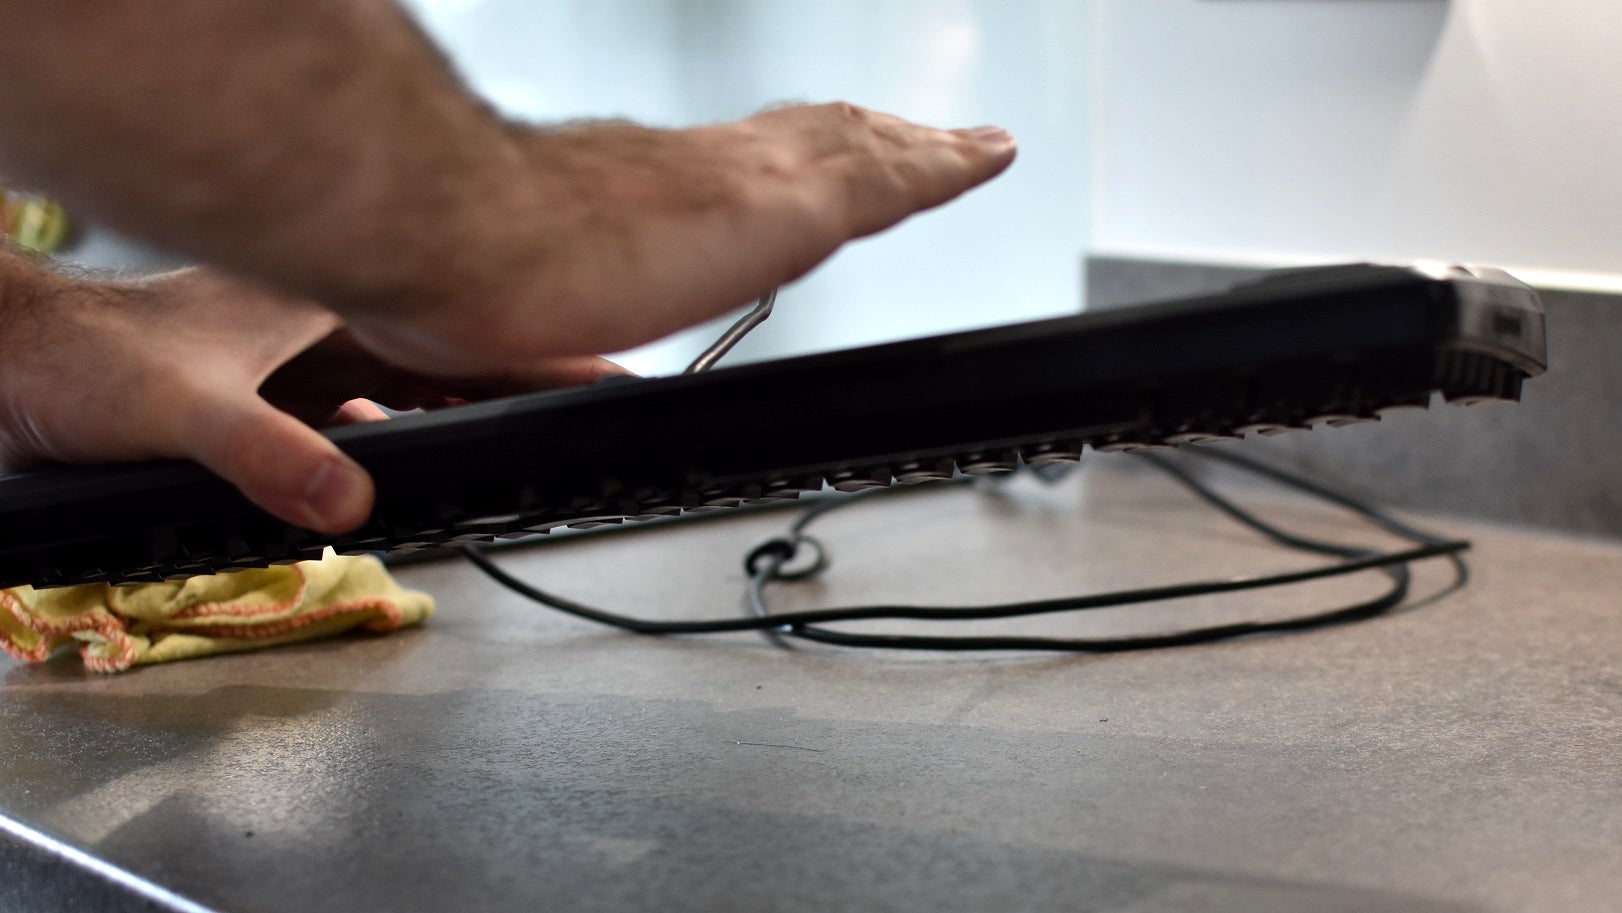 A keyboard being held upside down and shaken, so that dust and dirt falls out.